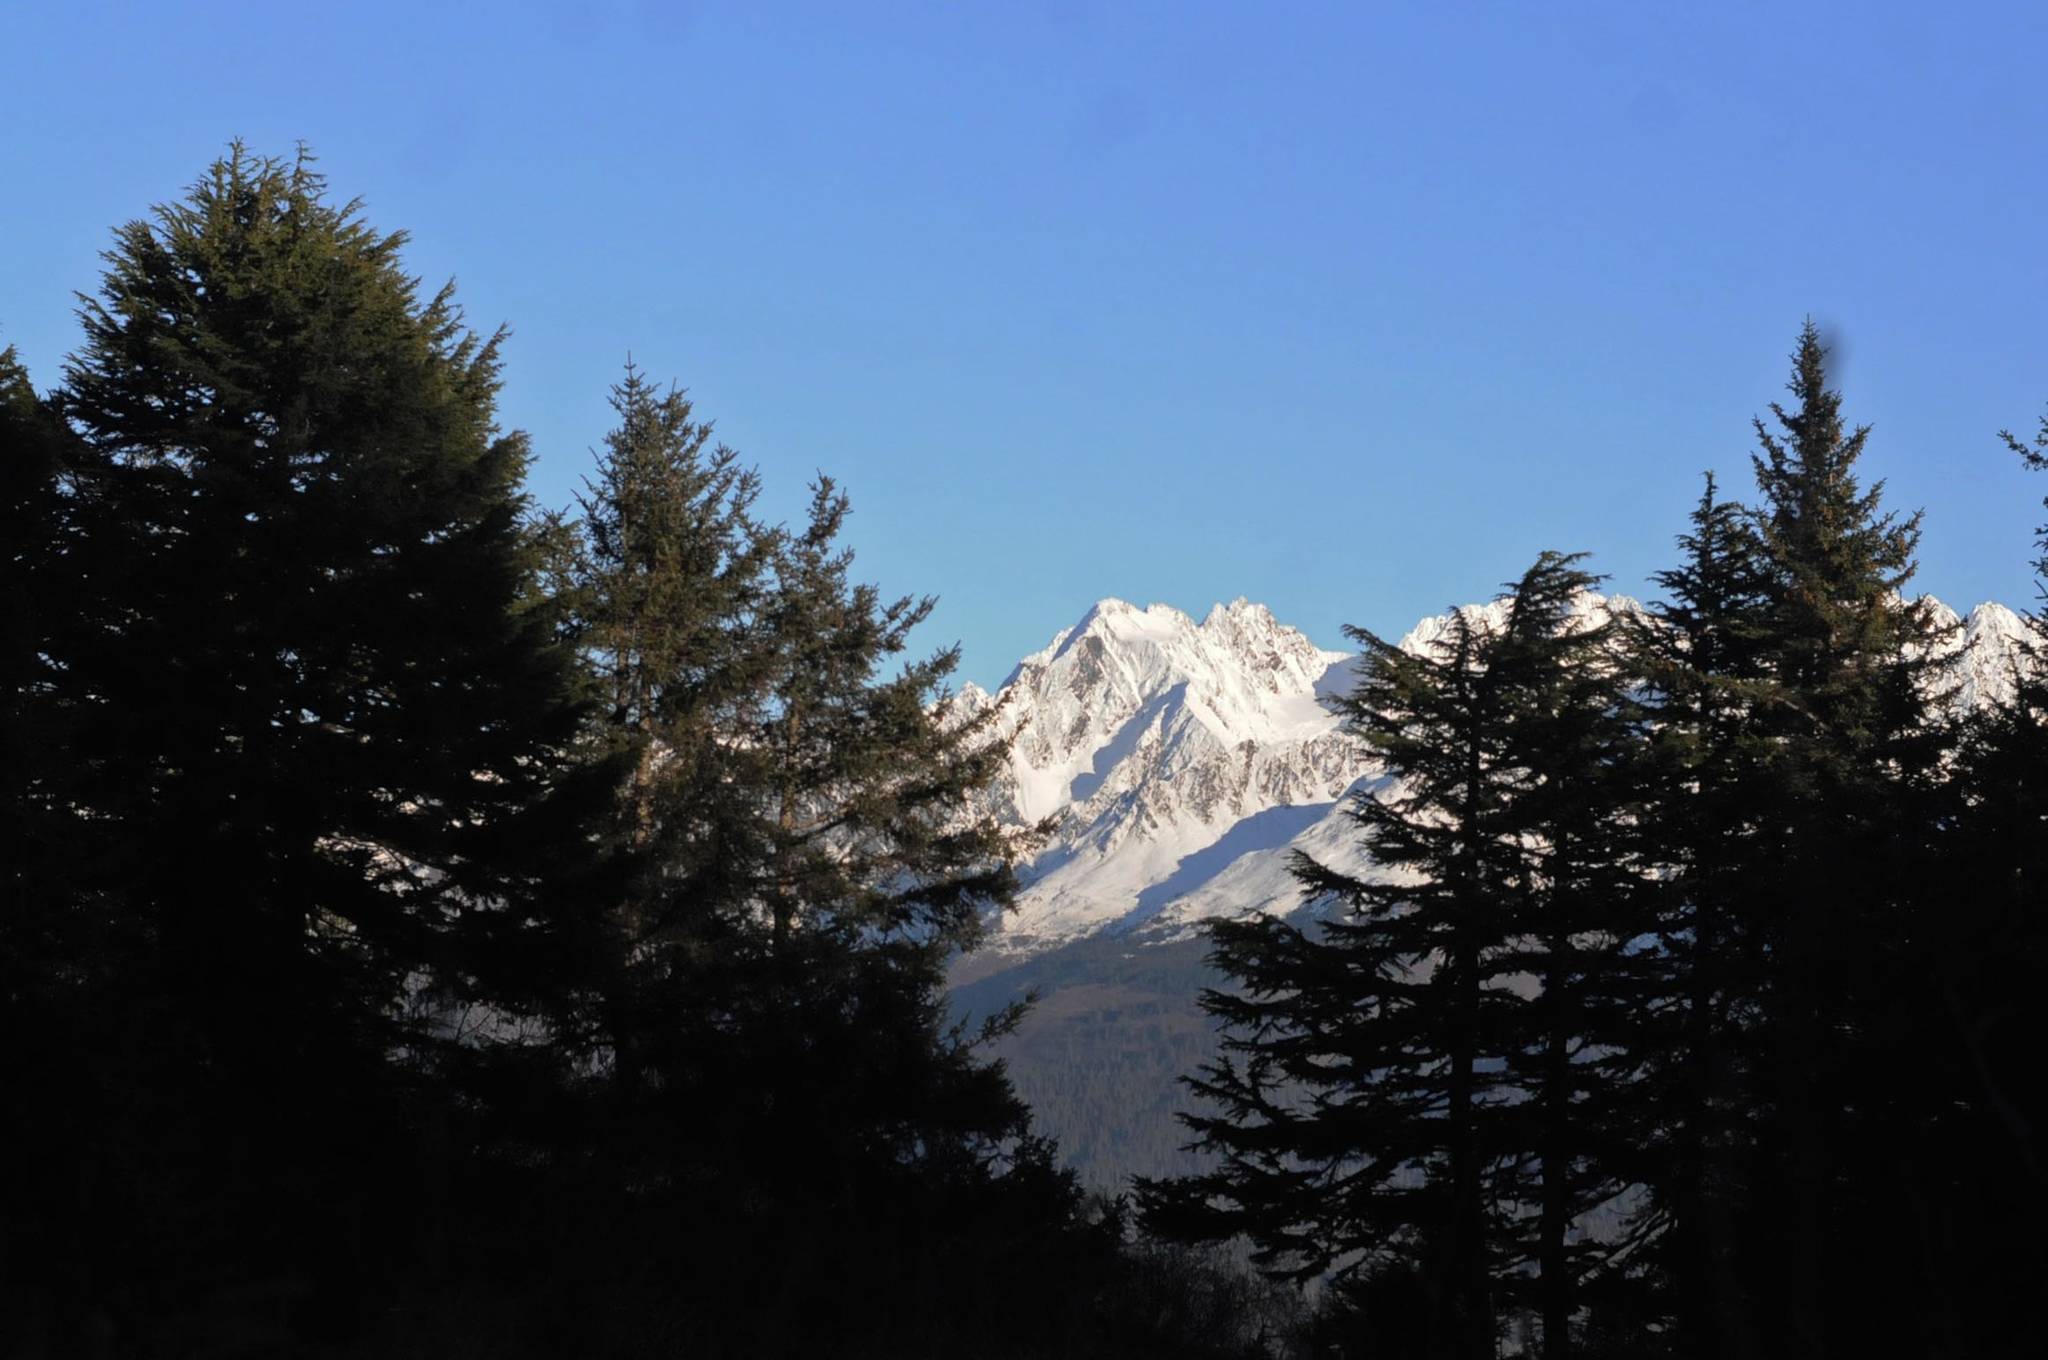 In this November 2016 file photo, a peak in the Chugach Mountains looms above a spruce forest near Seward, Alaska. (Photo by Elizabeth Earl/Peninsula Clarion, file)